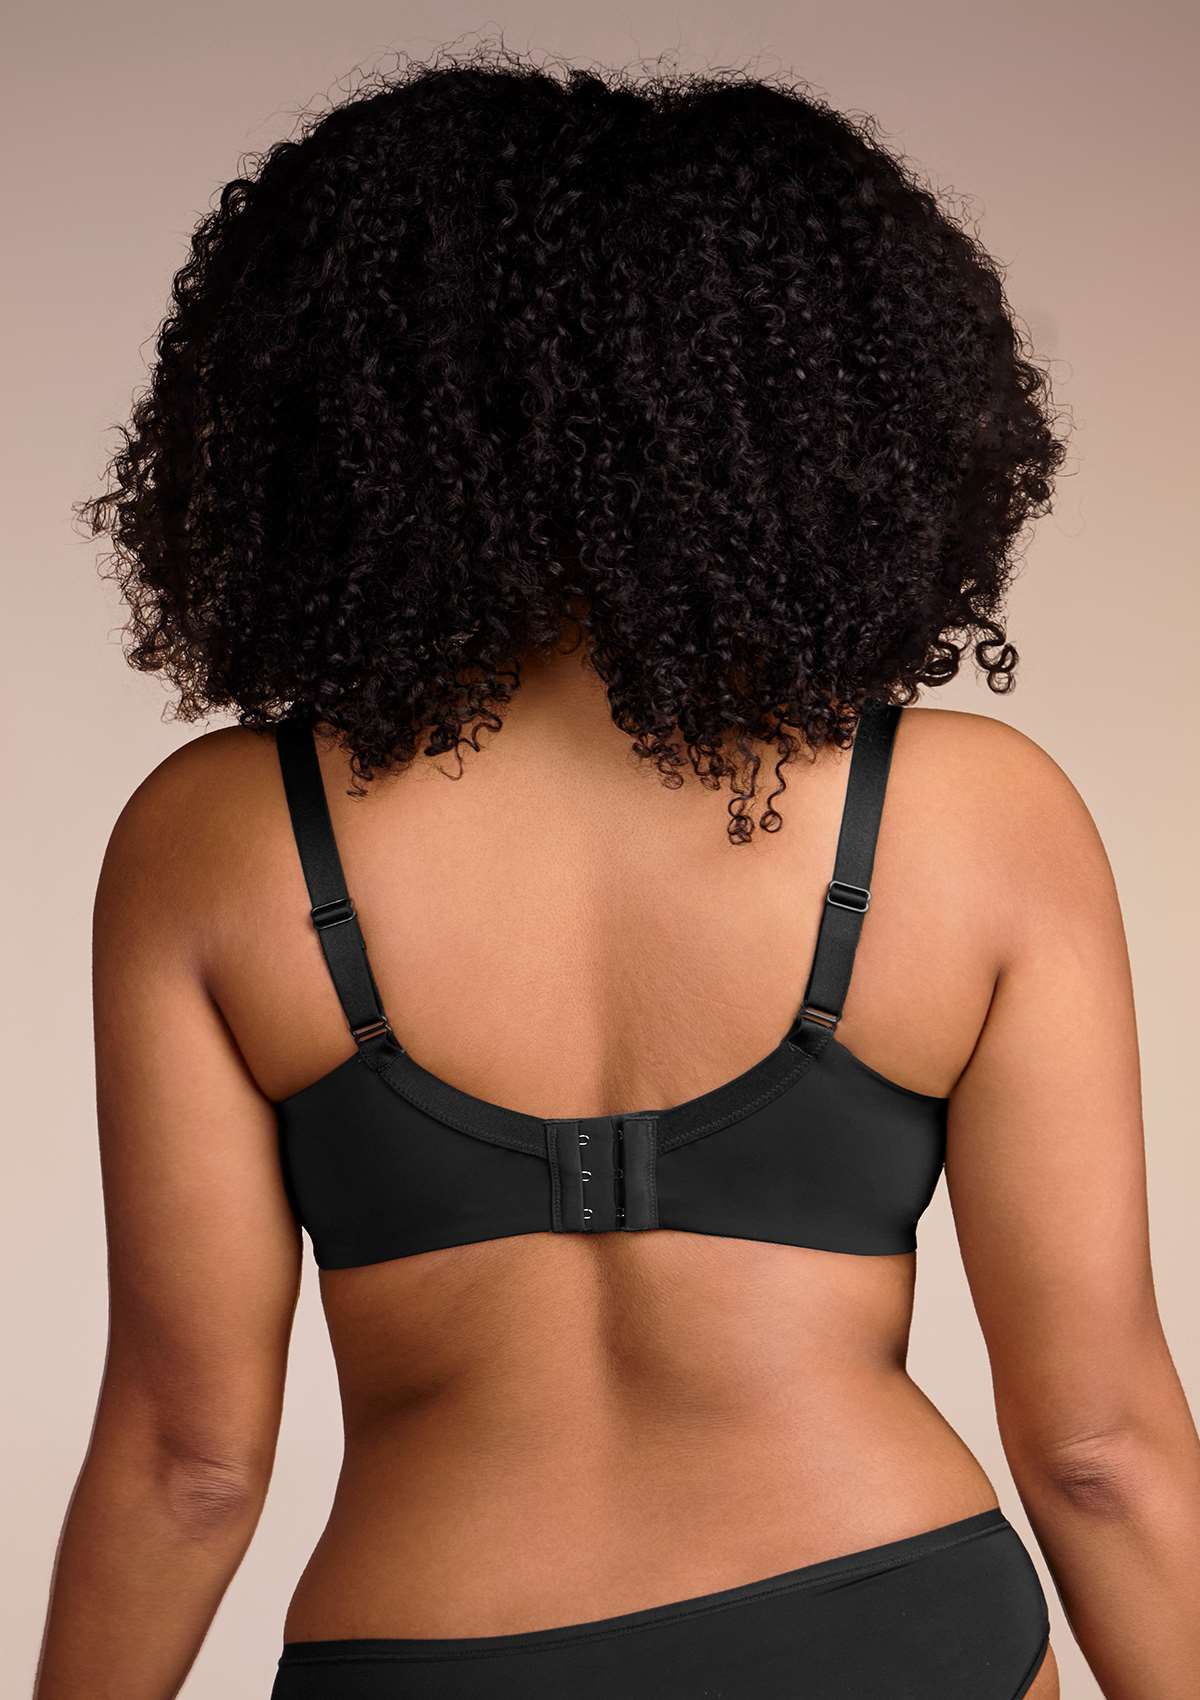 HSIA Gemma Smooth Padded T-shirt Everyday Bras - For Lift And Comfort - Black / 34 / C